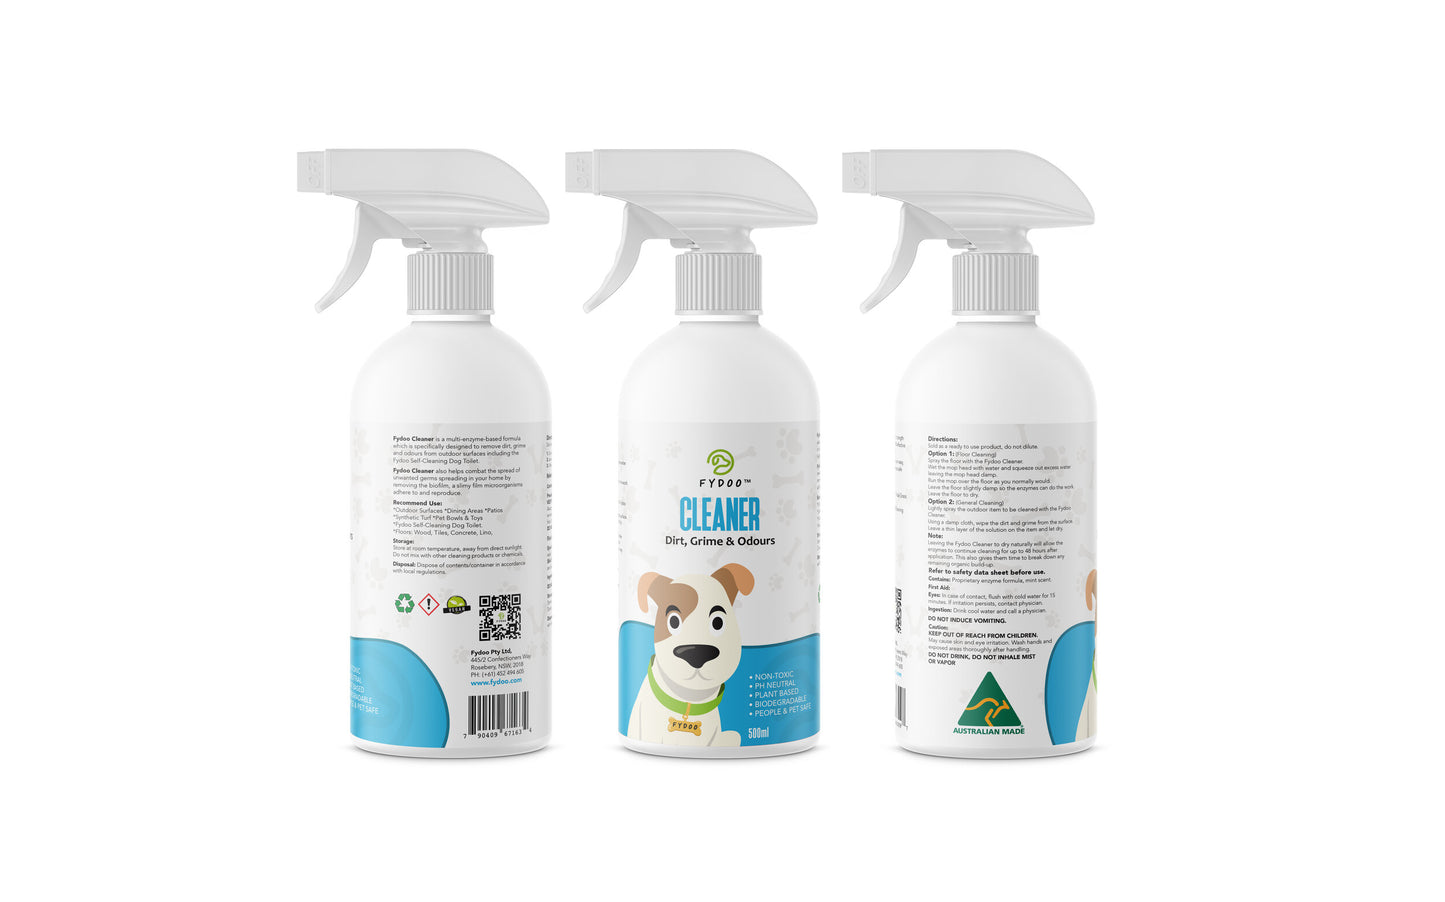 Fydoo® Cleaner 500ml - (Dirt, Grime & Odour Removal)